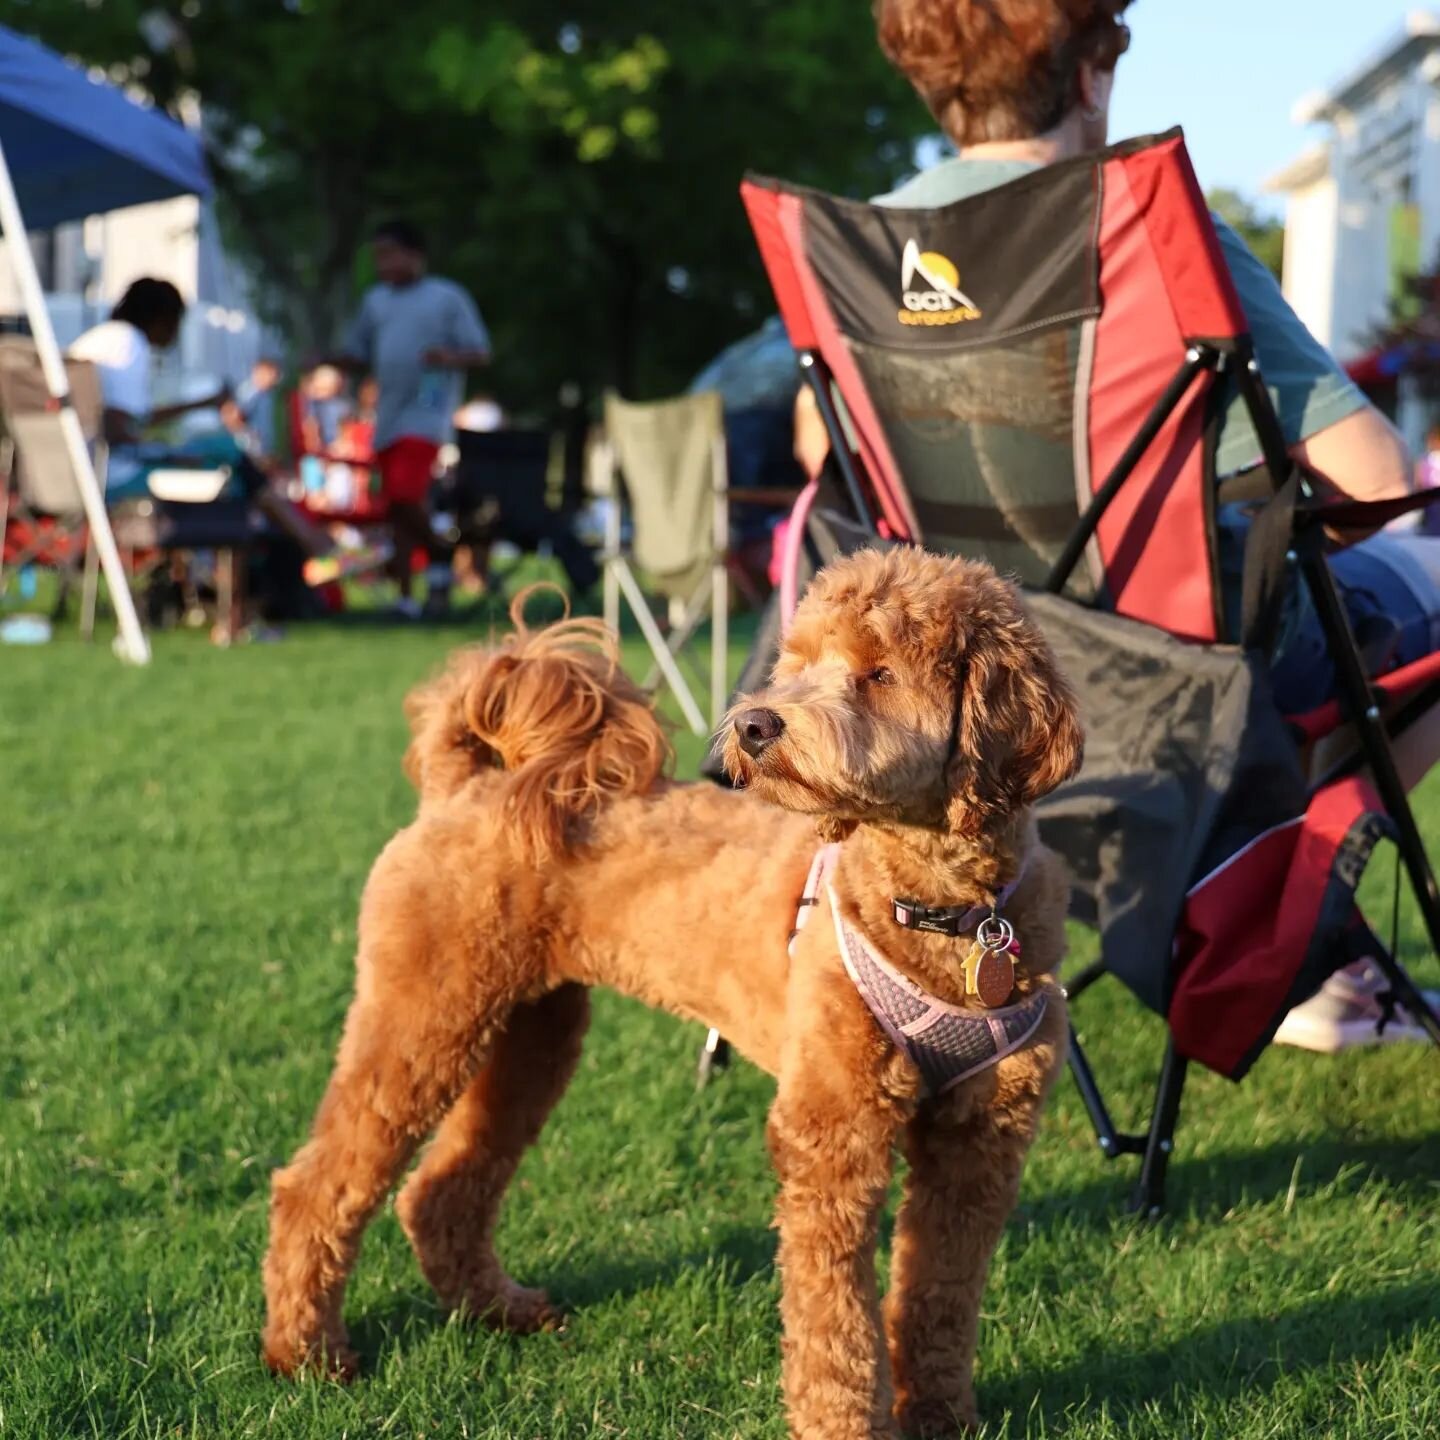 Maisey is enjoying Concerts in the Park again here in Big Spring Park.